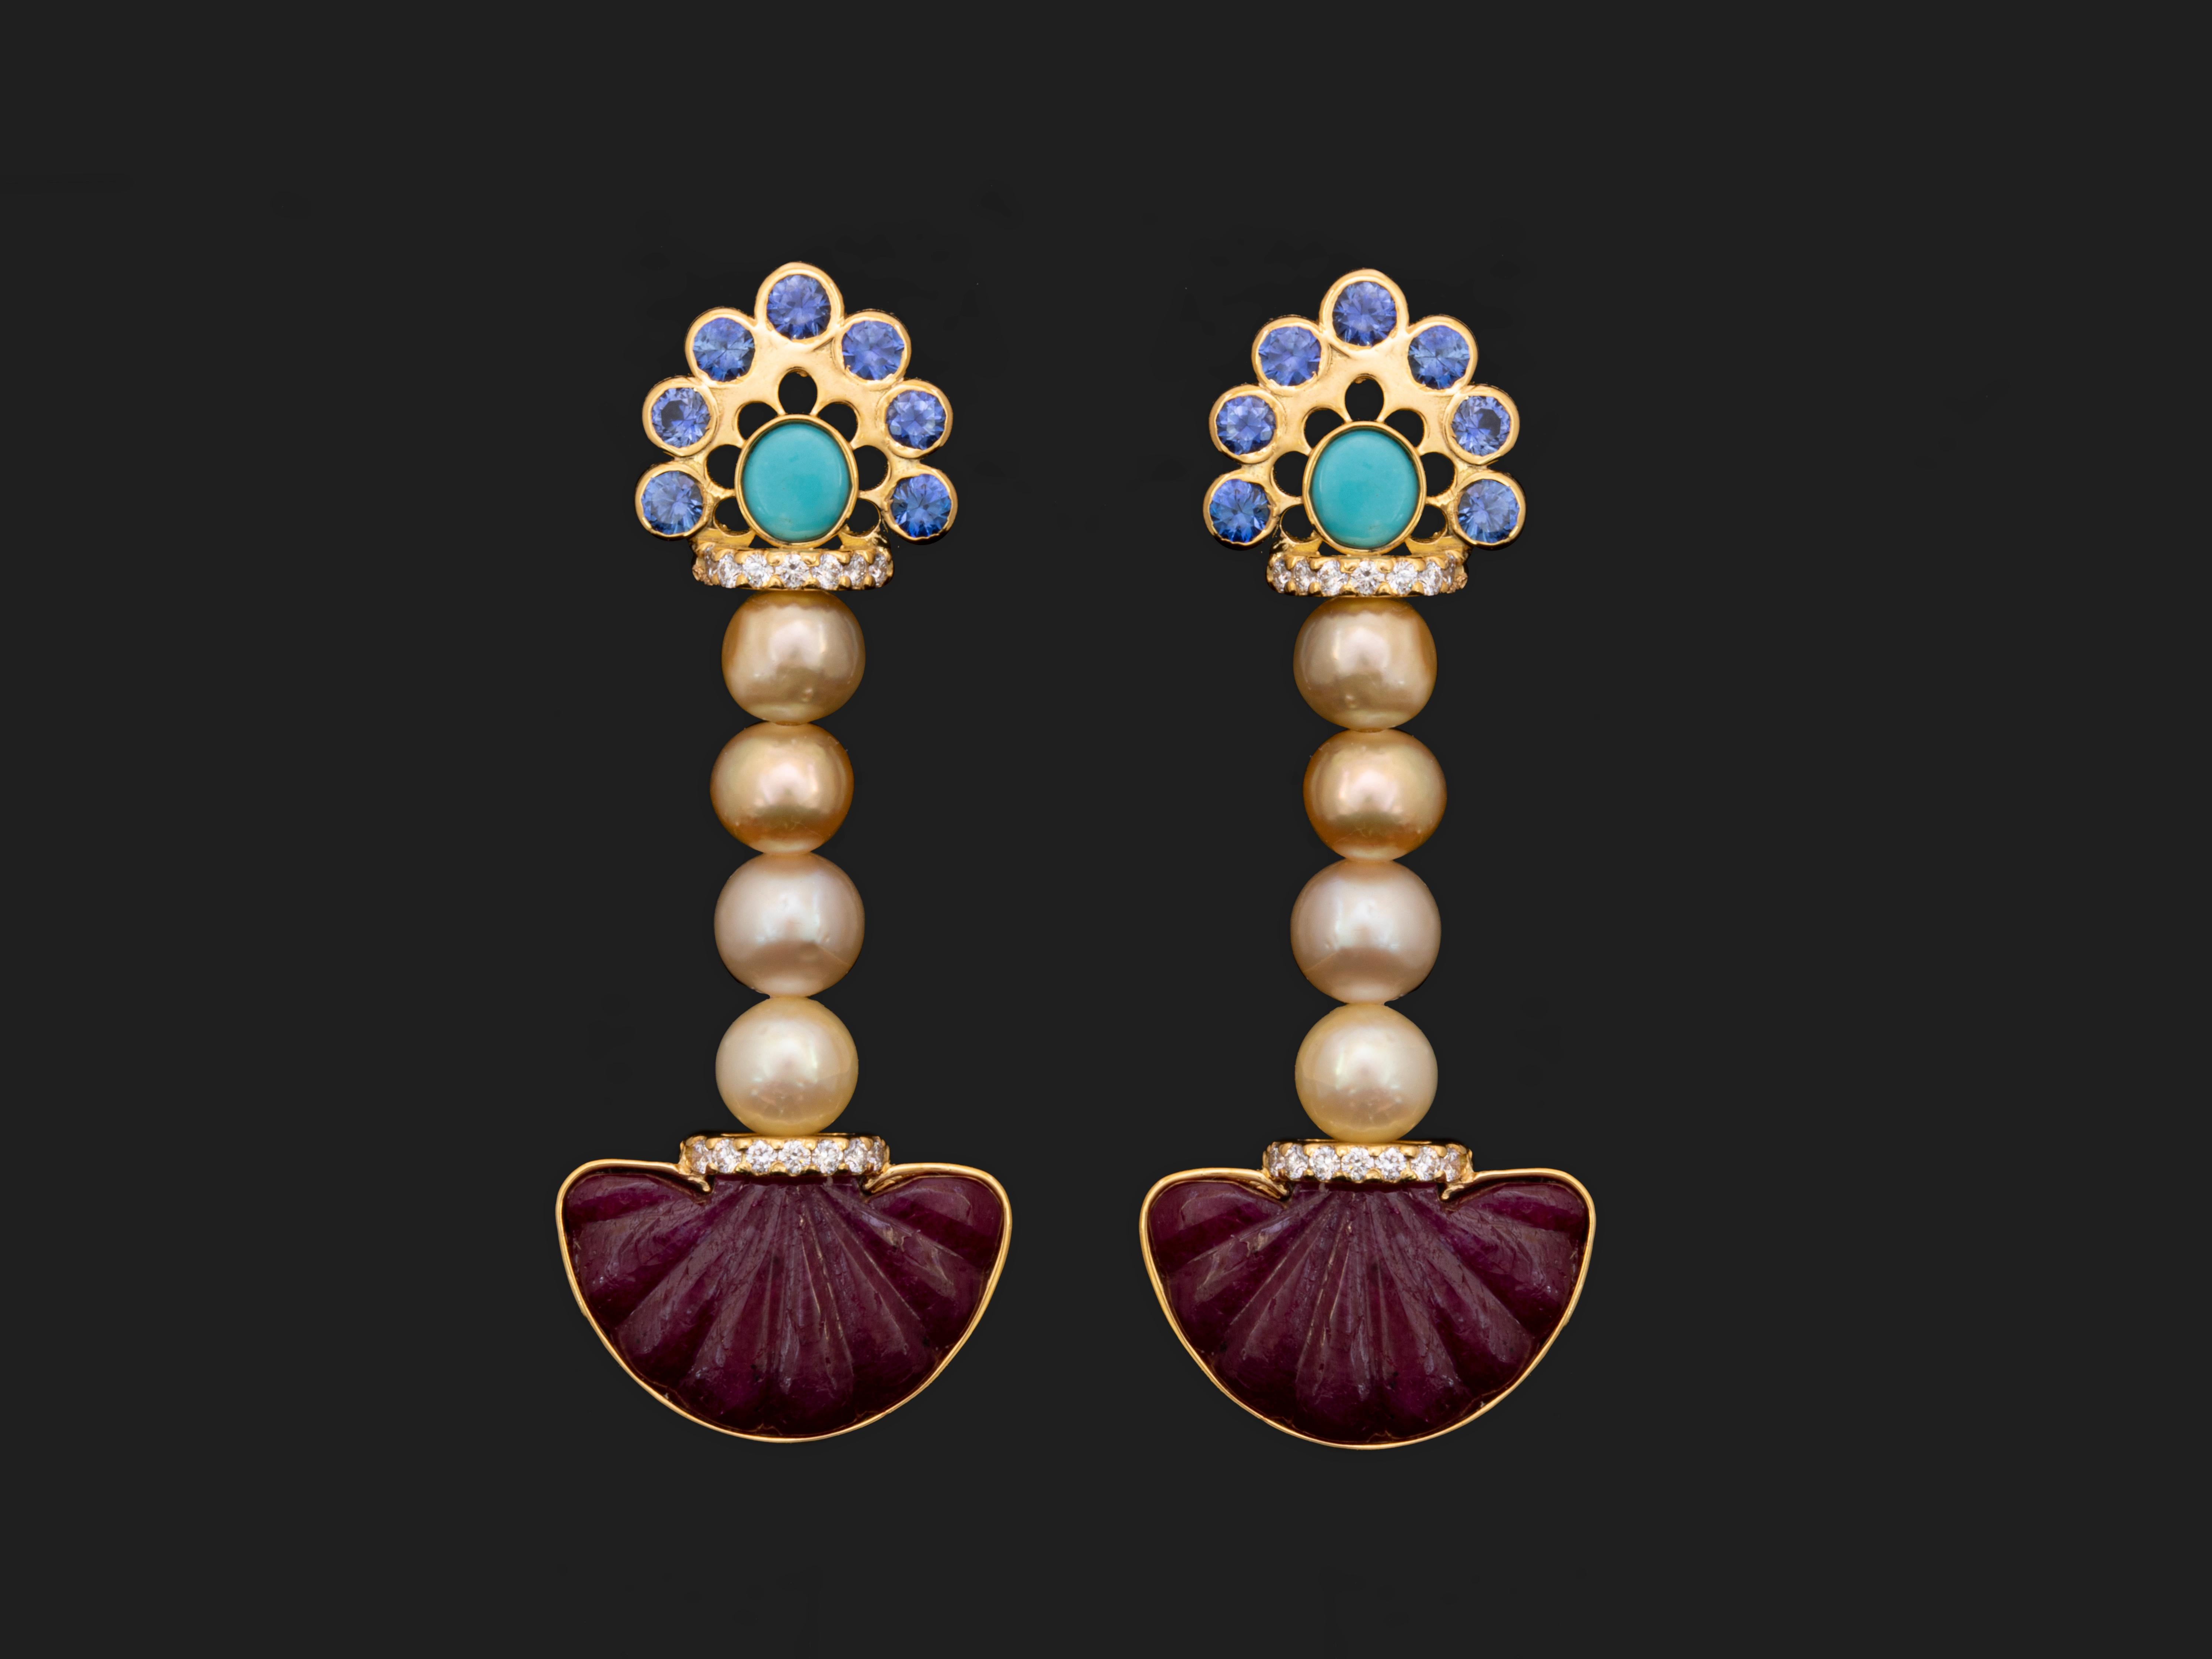 Pendulum earrings celebrating color.
14 ct. of semi round multi colored Pinctada Radiata pearls hang beautifully in-between carved ruby pendulums and  18k yellow gold motifs studded in blue sapphire and turquoise gems.


Gold Weight: 7.27 g
8 Pearls